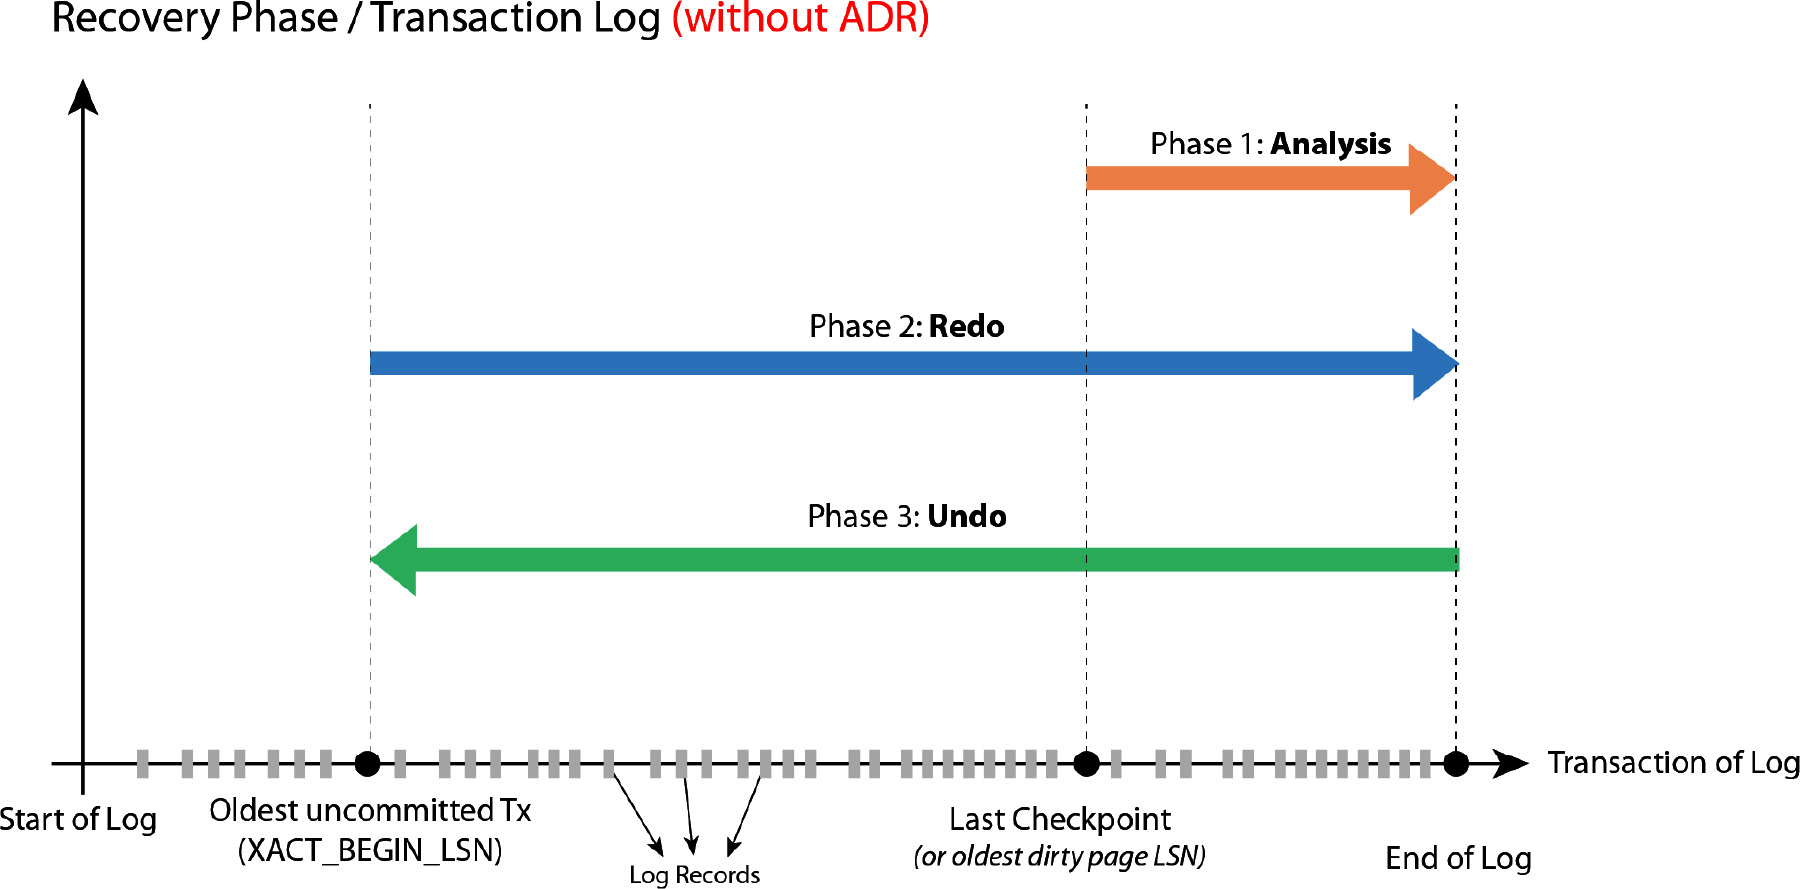 The standard database recovery process without ADR